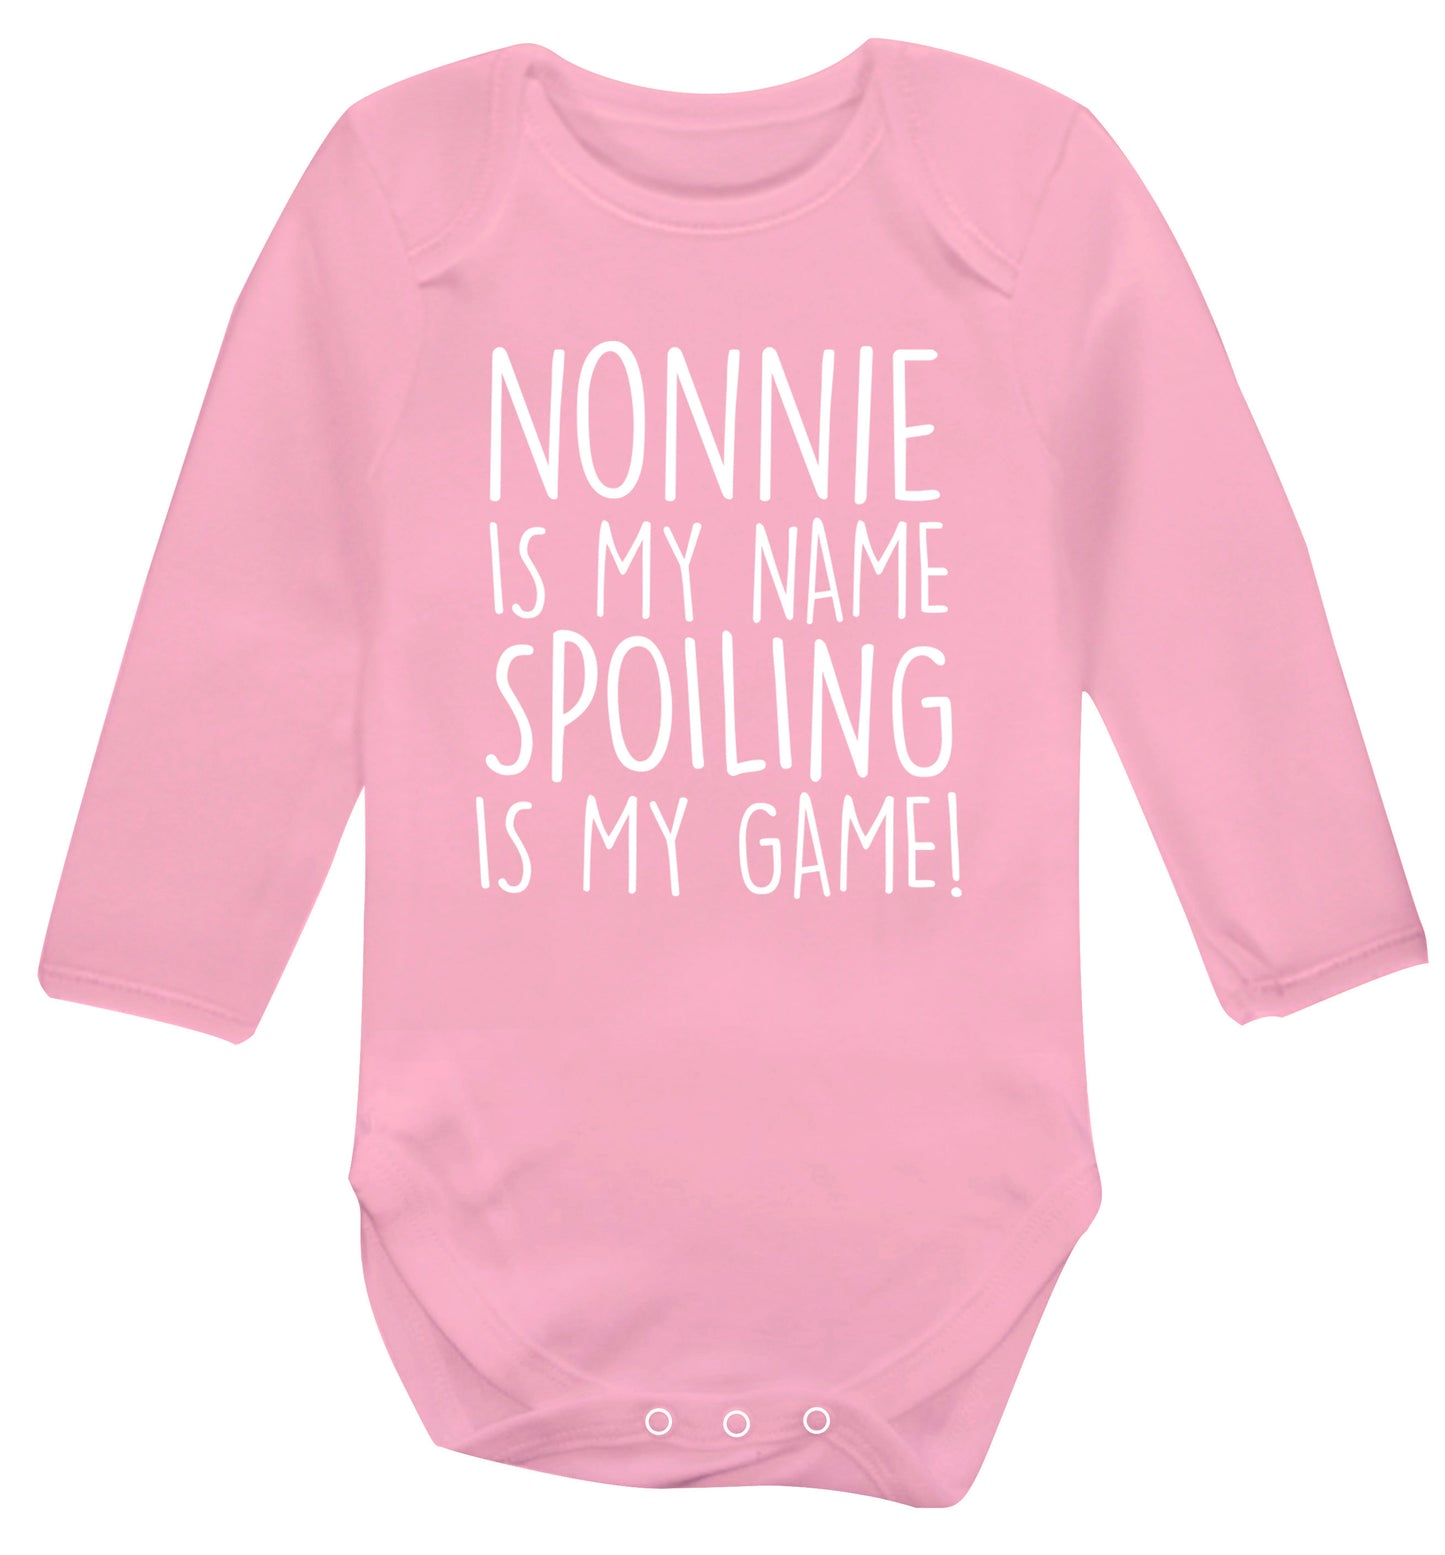 Nonnie is my name, spoiling is my game Baby Vest long sleeved pale pink 6-12 months